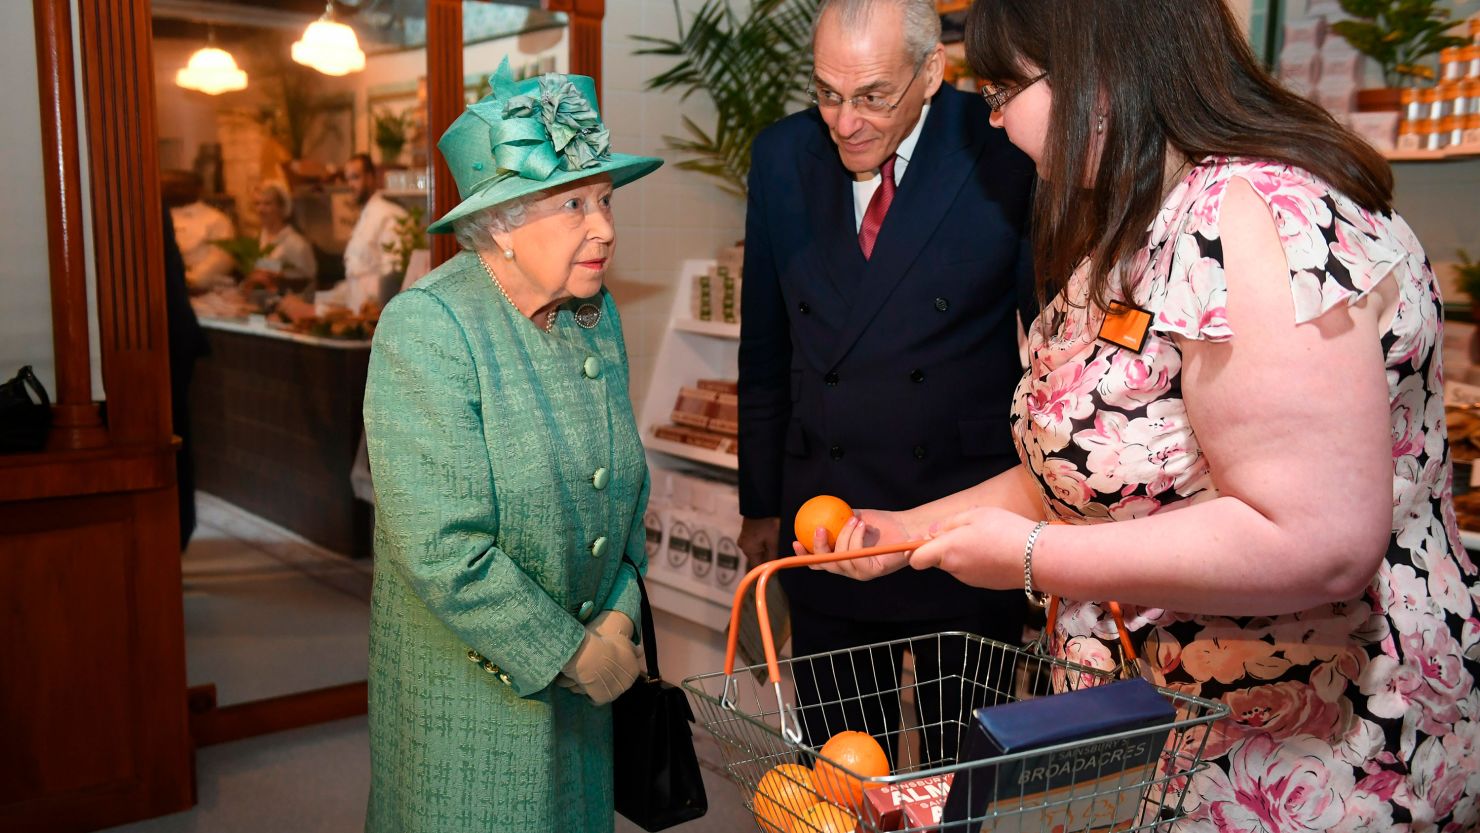 The Queen seemed to enjoy her visit to the 1860s style Sainsbury's store.